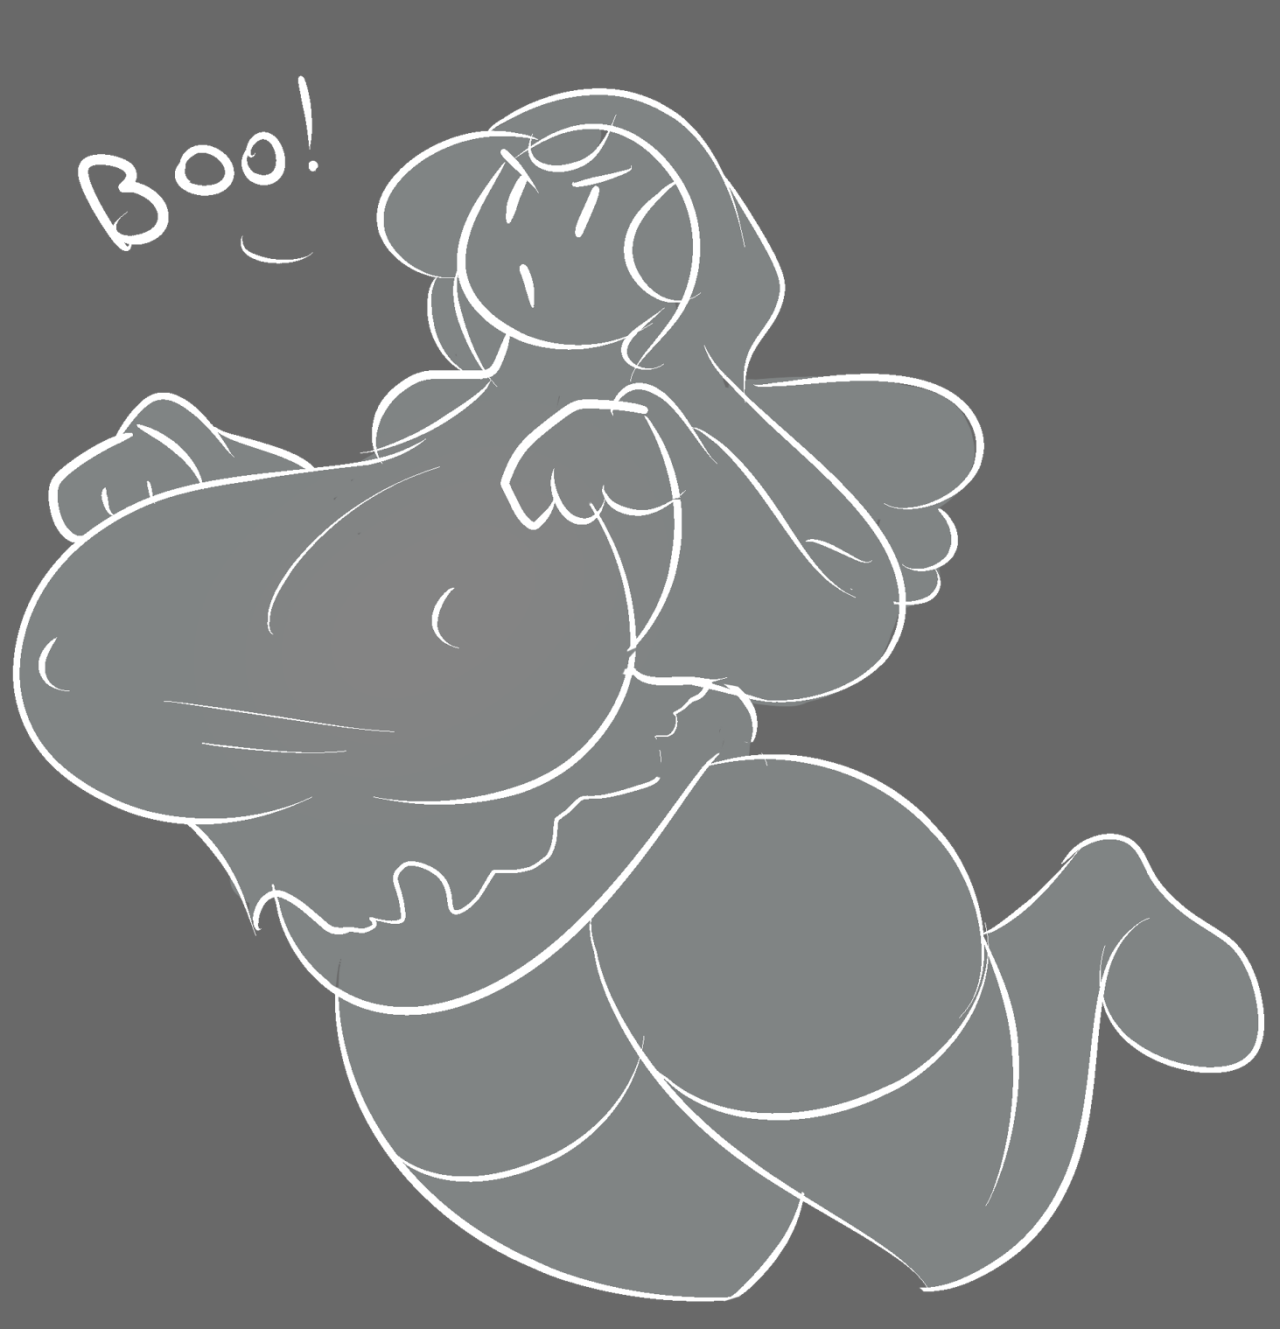 theycallhimcake:  Today was a pointless doodle day. :/ Also there’s an oven mitt